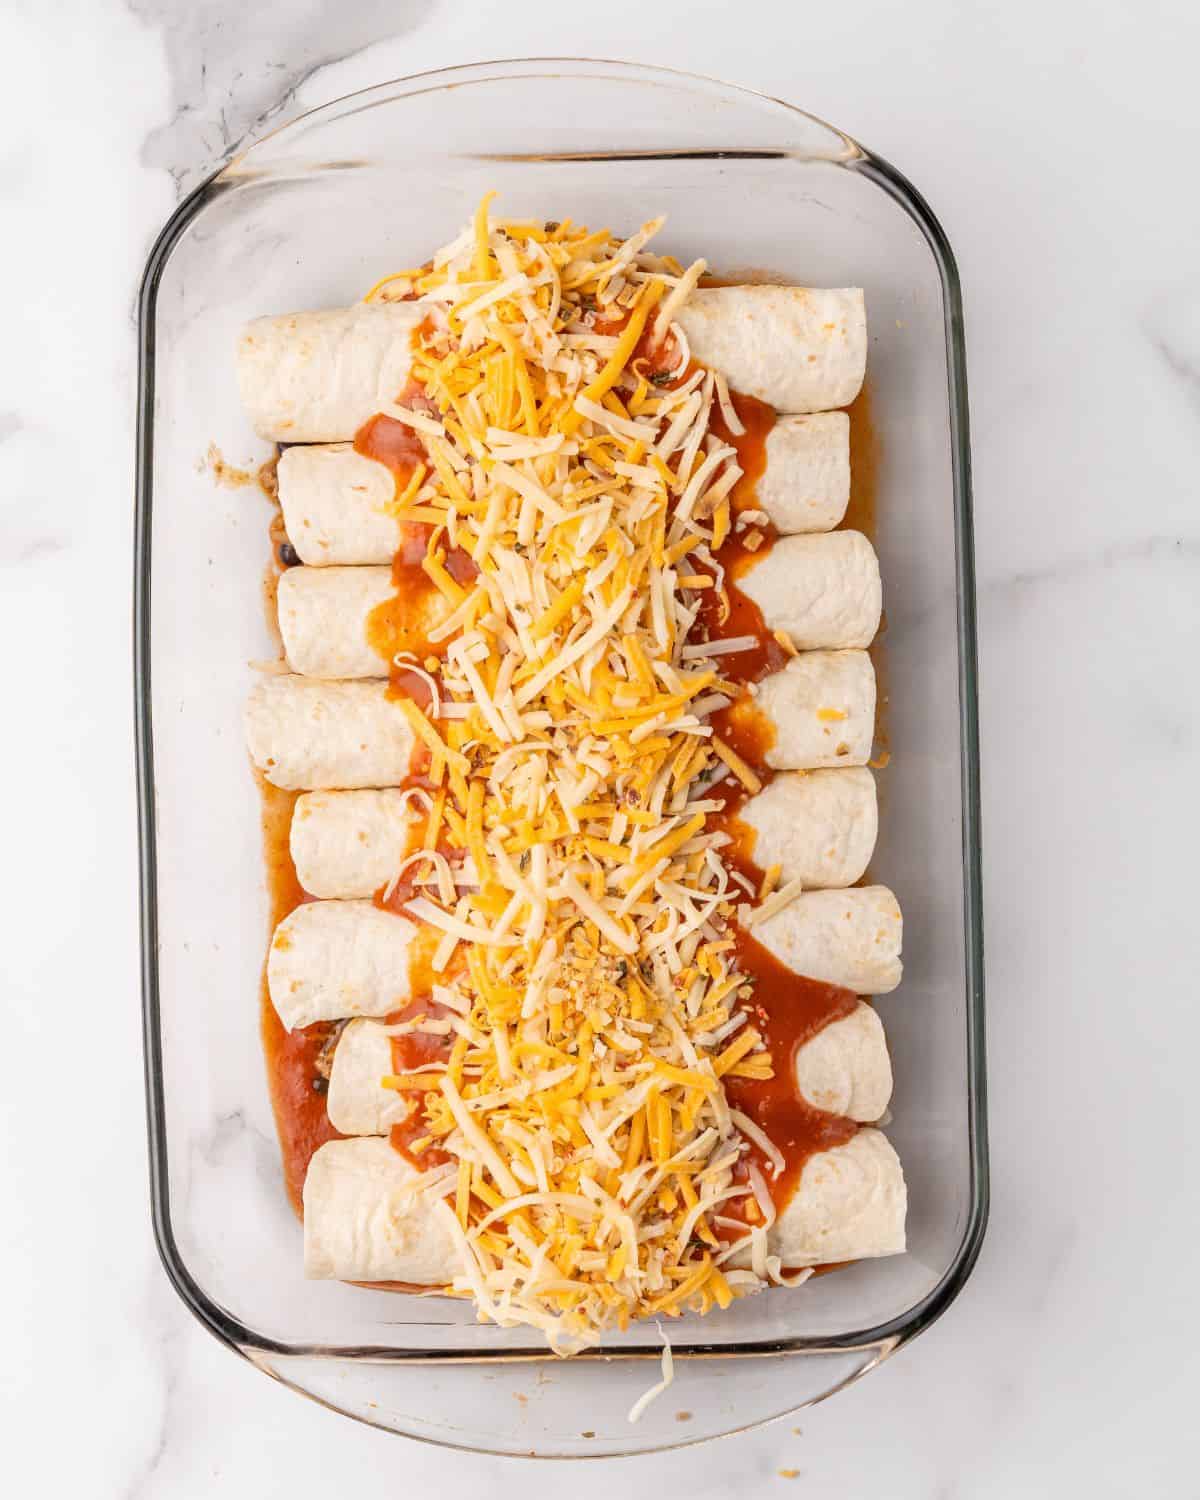 sauce and cheese over the turkey enchiladas.